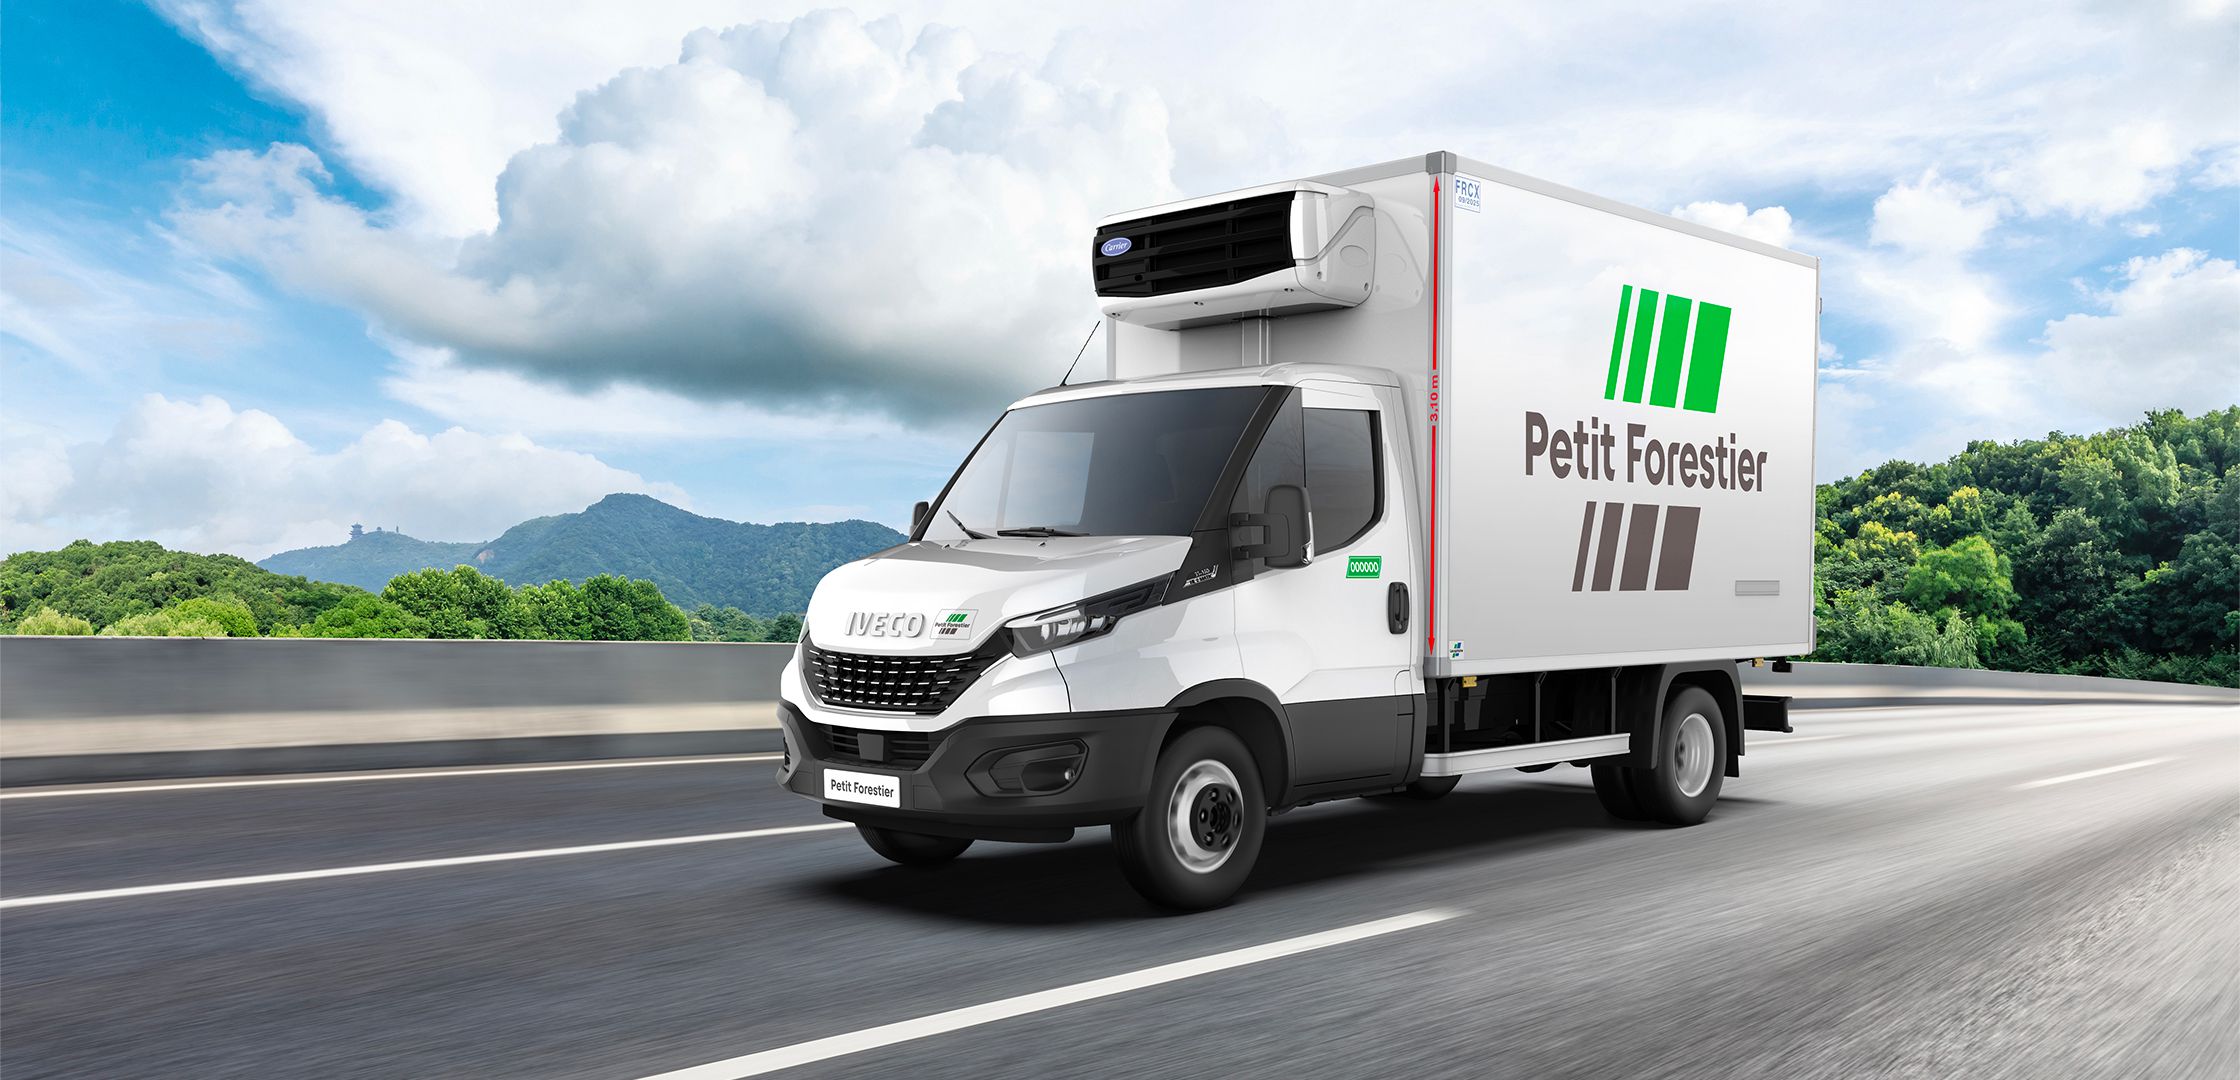 Refrigeration for Hire | Petit Forestier